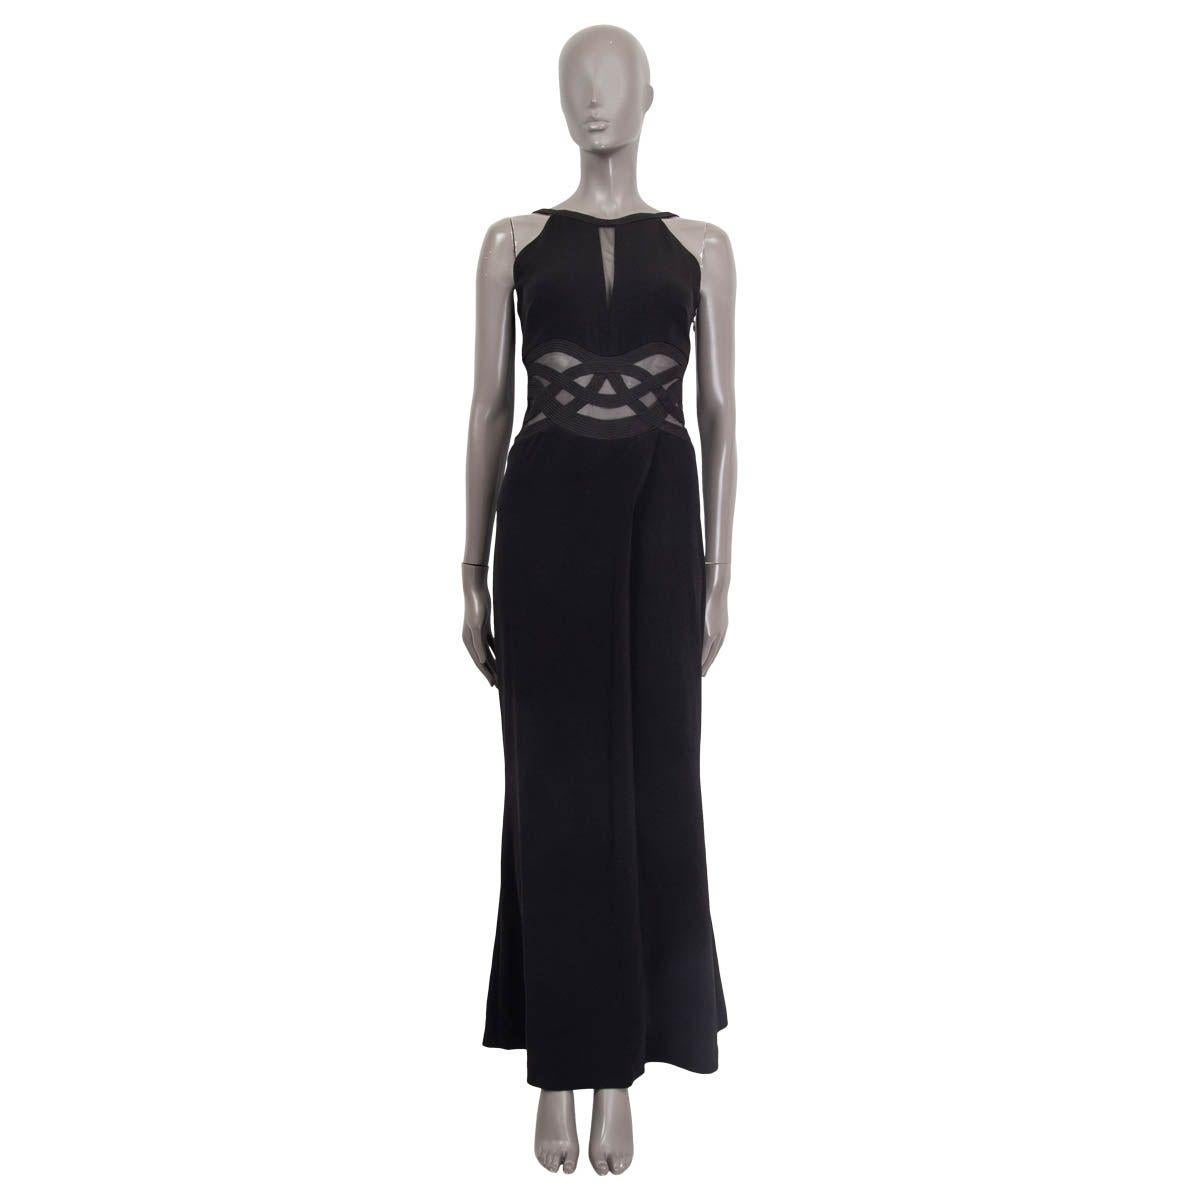 100% authentic Versace Collection evening gown in black cotton (80%), polyester (18%) and elastane (2%). Features semi sheer cut out details on the waist, the back and the bust and has a thigh slit. Opens with a zipper and a hook on the side. Lined